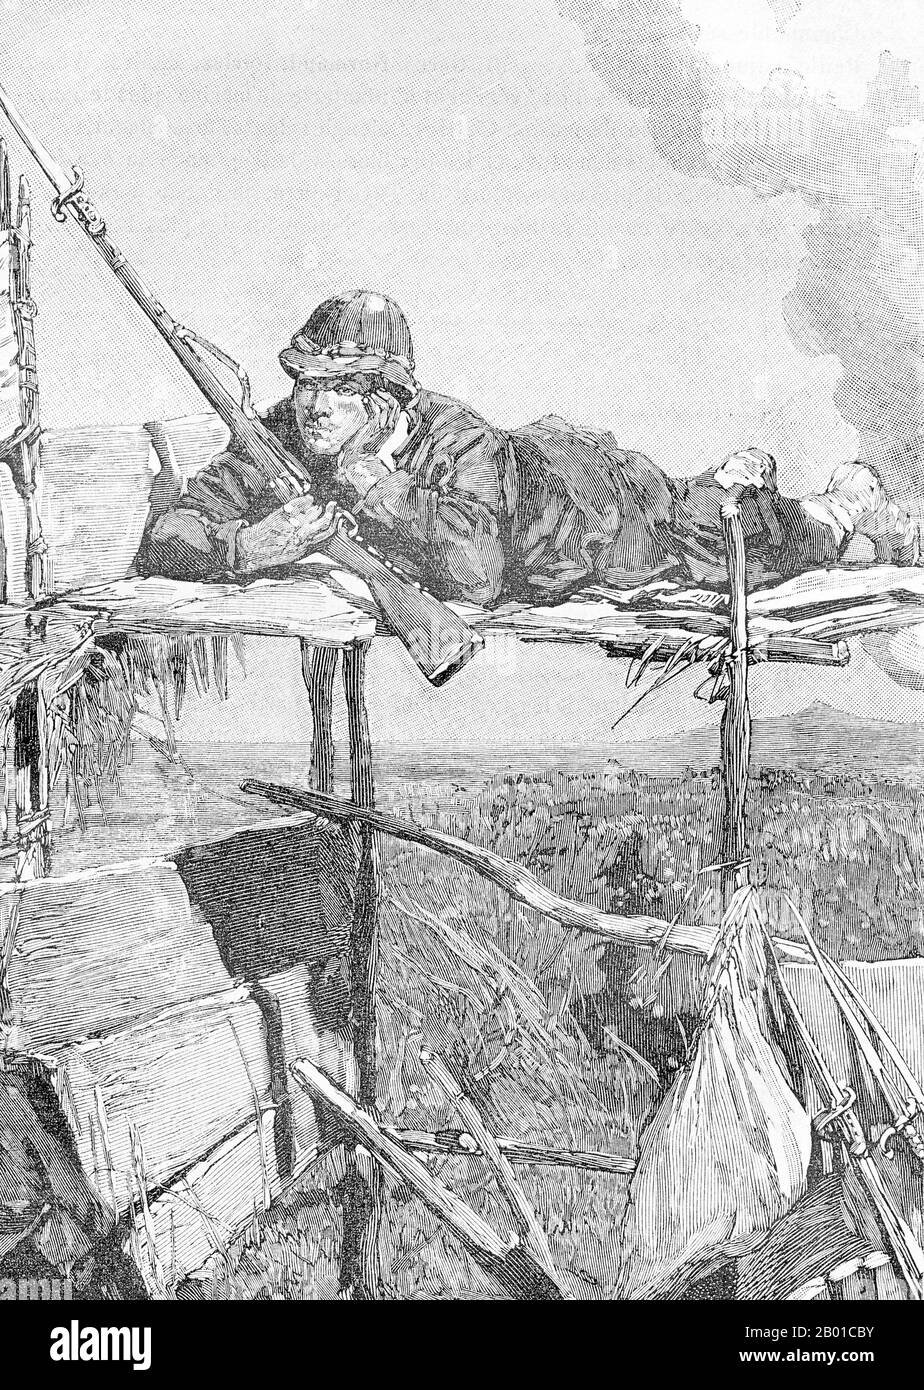 Vietnam: French Foreign Legion sniper during the Siege of Tuyen Quang, November 1884 to March 1885. Engraving by Charles-Lucien Huard (12 February 1837 - 22 January 1899), 1887.  The Tonkin Campaign (French: Campagne du Tonkin) was an armed conflict fought between June 1883 and April 1886 by the French against, variously, the Vietnamese, Liu Yongfu's Black Flag Army and the Chinese Guangxi and Yunnan armies to occupy Tonkin (northern Vietnam) and entrench a French protectorate there. Stock Photo